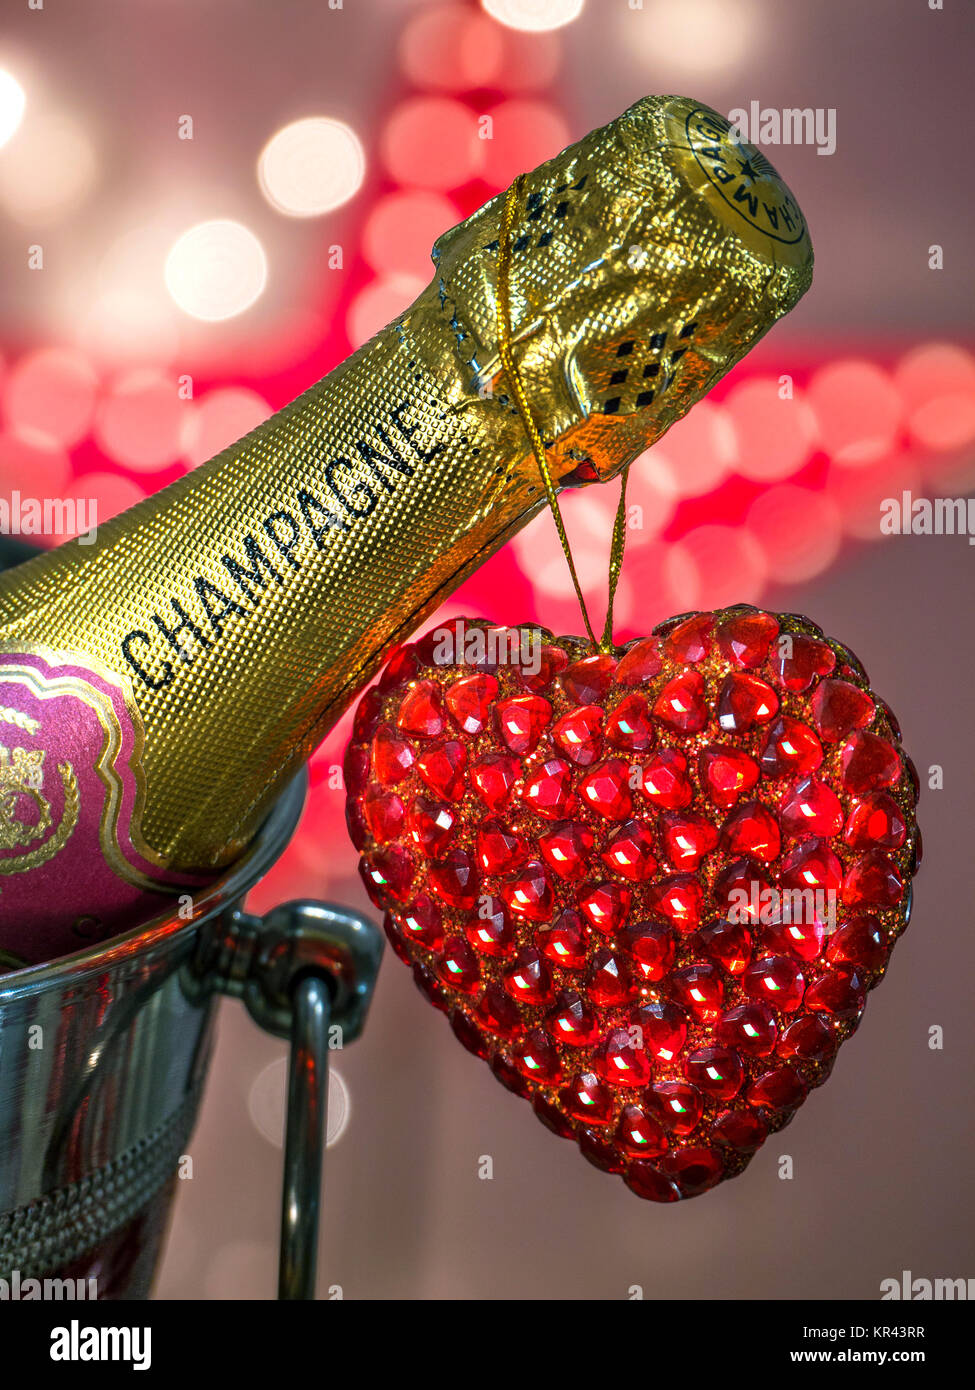 CHAMPAGNE LOVE PARTY LIGHTS Champagne bottle in wine cooler with sparkling love heart and sparkling celebration lights Stock Photo